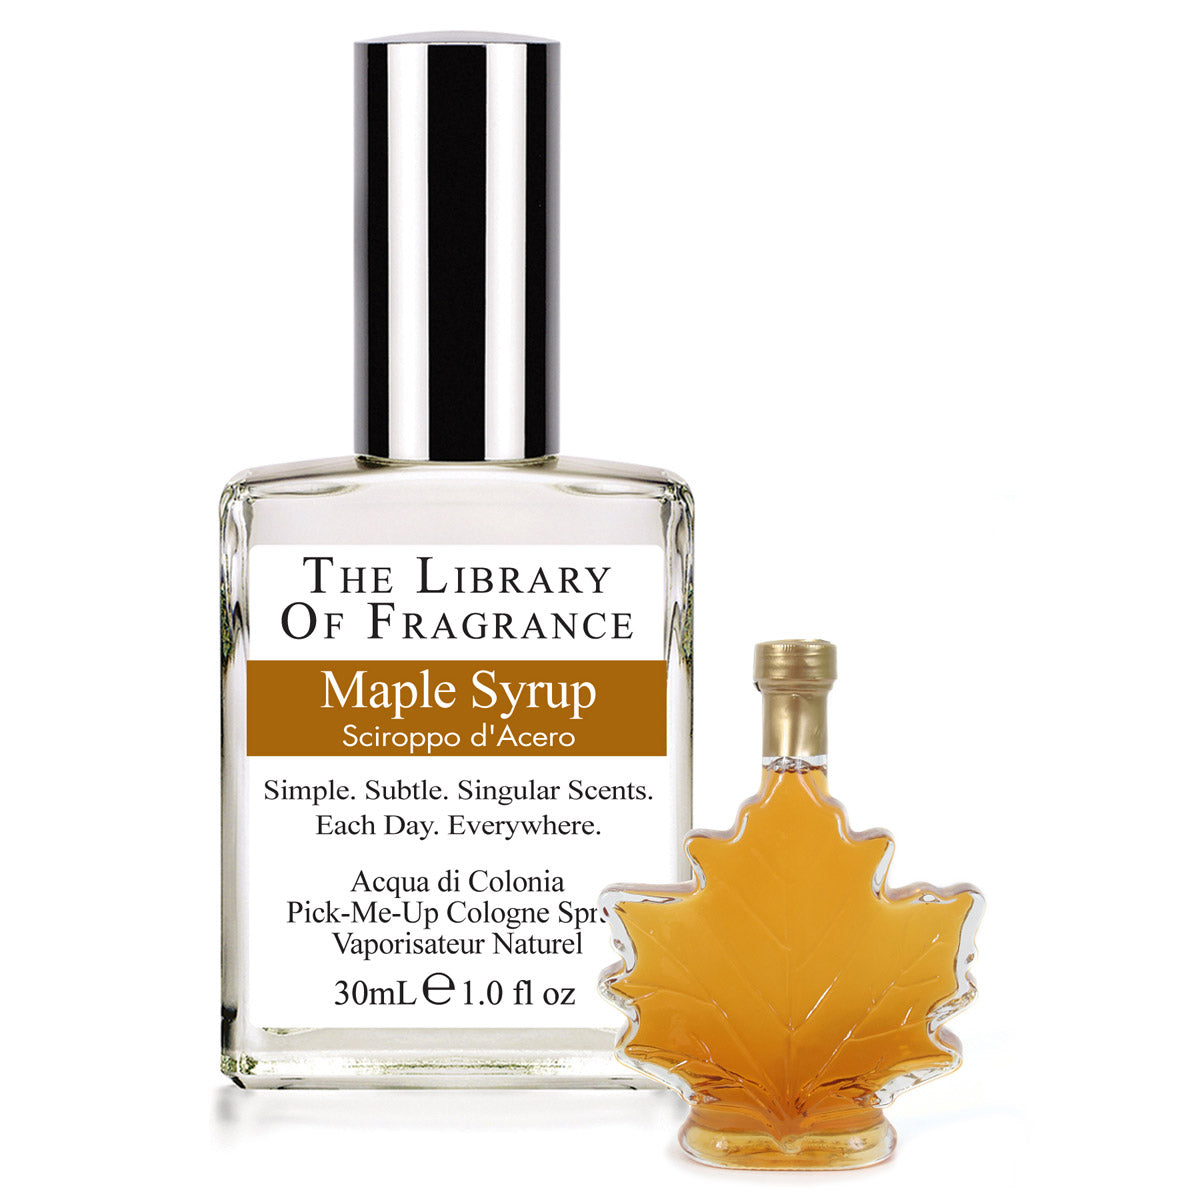 The Library Of Fragrance Maple Syrup 30ml Cologne AKA Demeter Fragrance